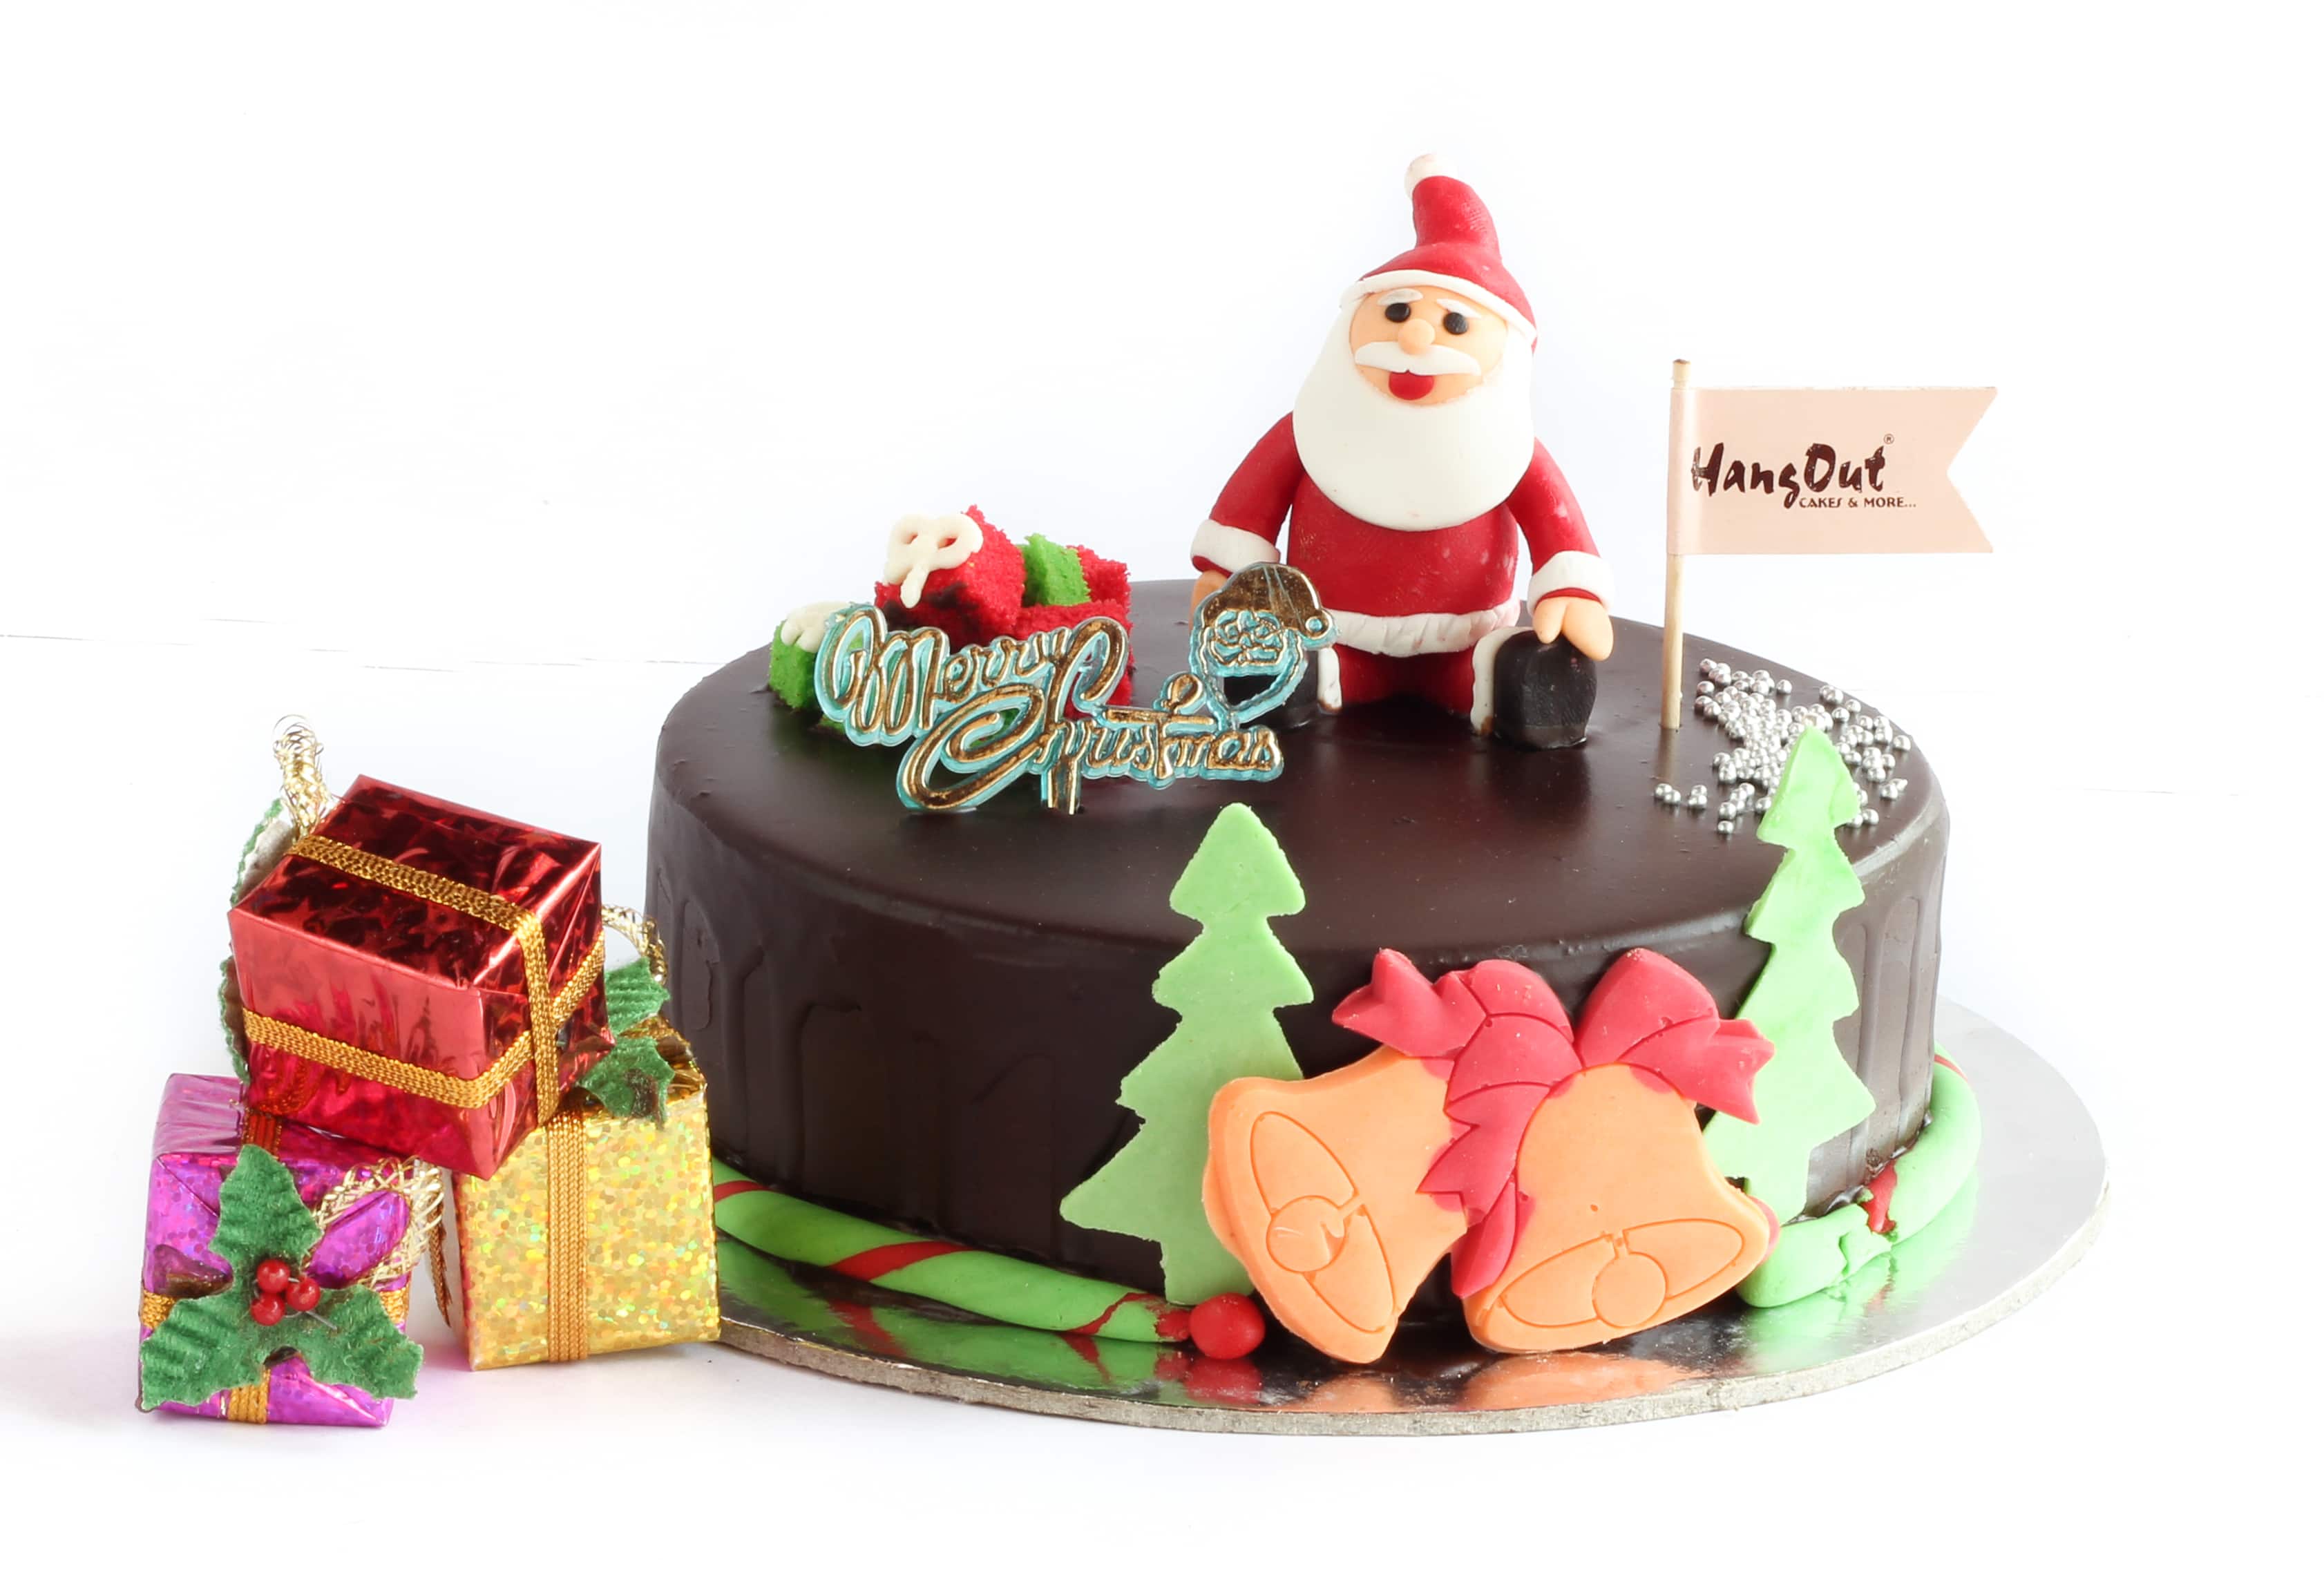 Find list of Hangout Cakes & More in IIT Powai - Hangout Cakes & More  Mumbai - Justdial